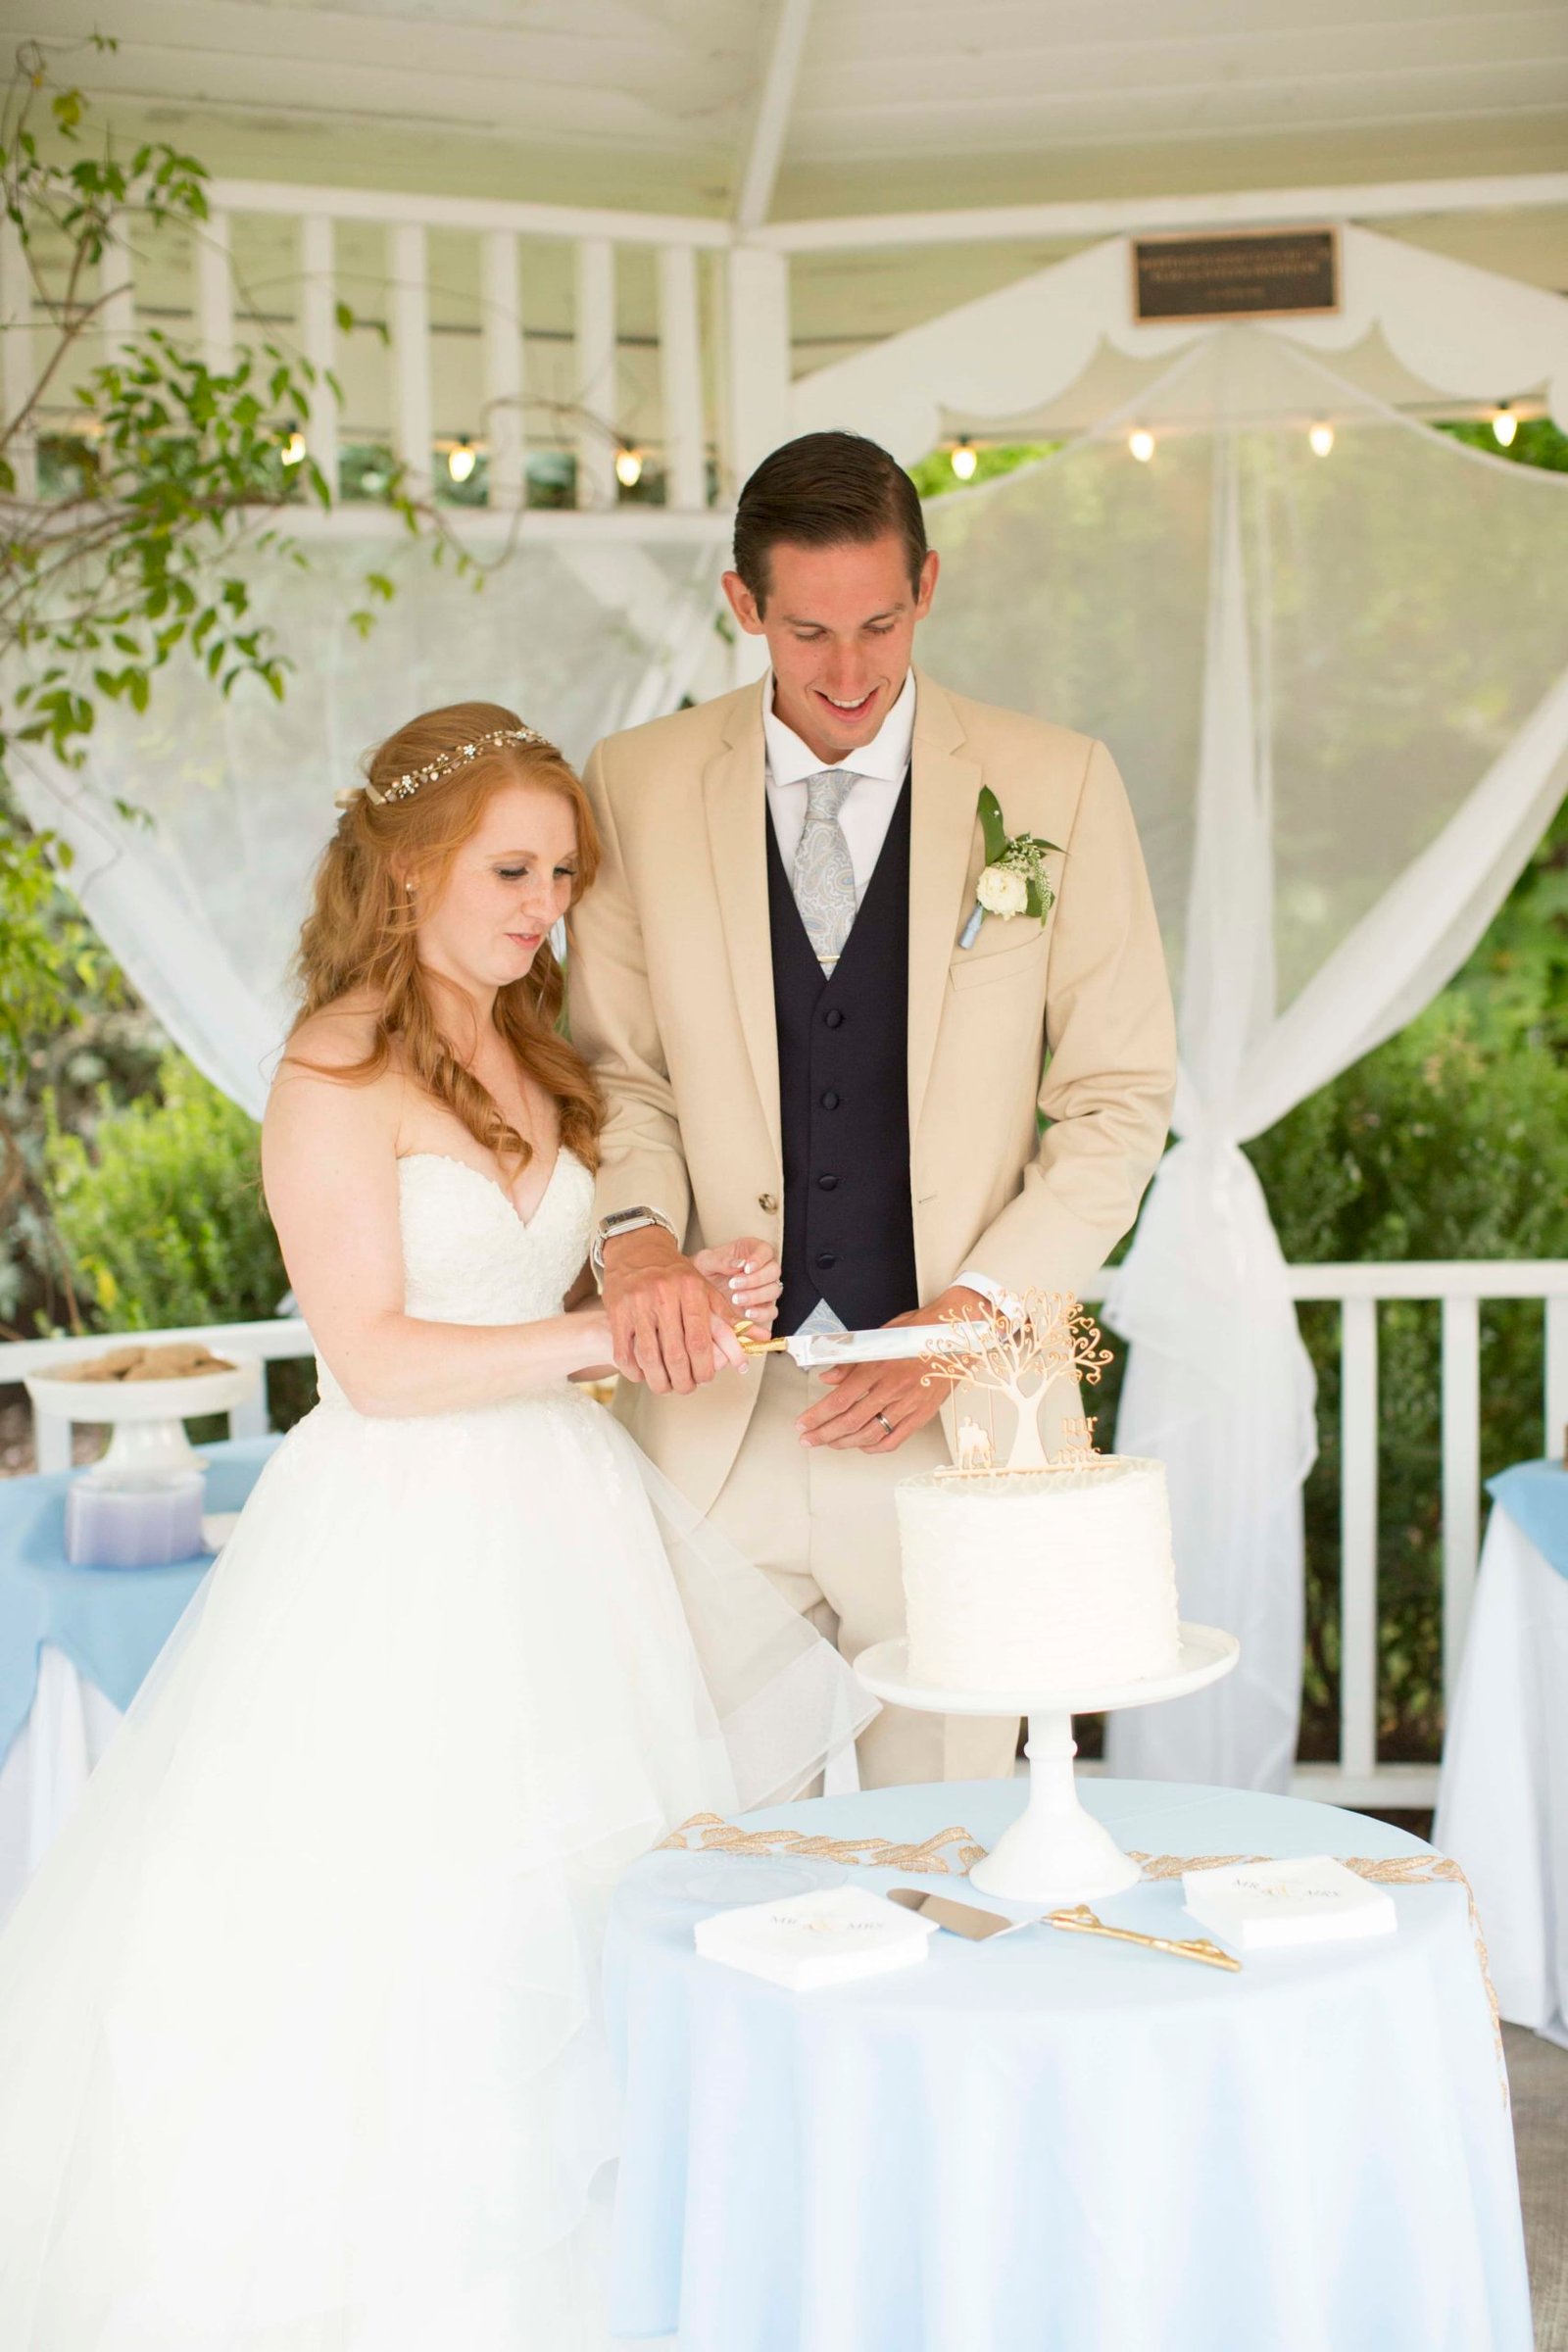 Bride and groom cutting the wedding cake at Heritage House in Arroyo Grande